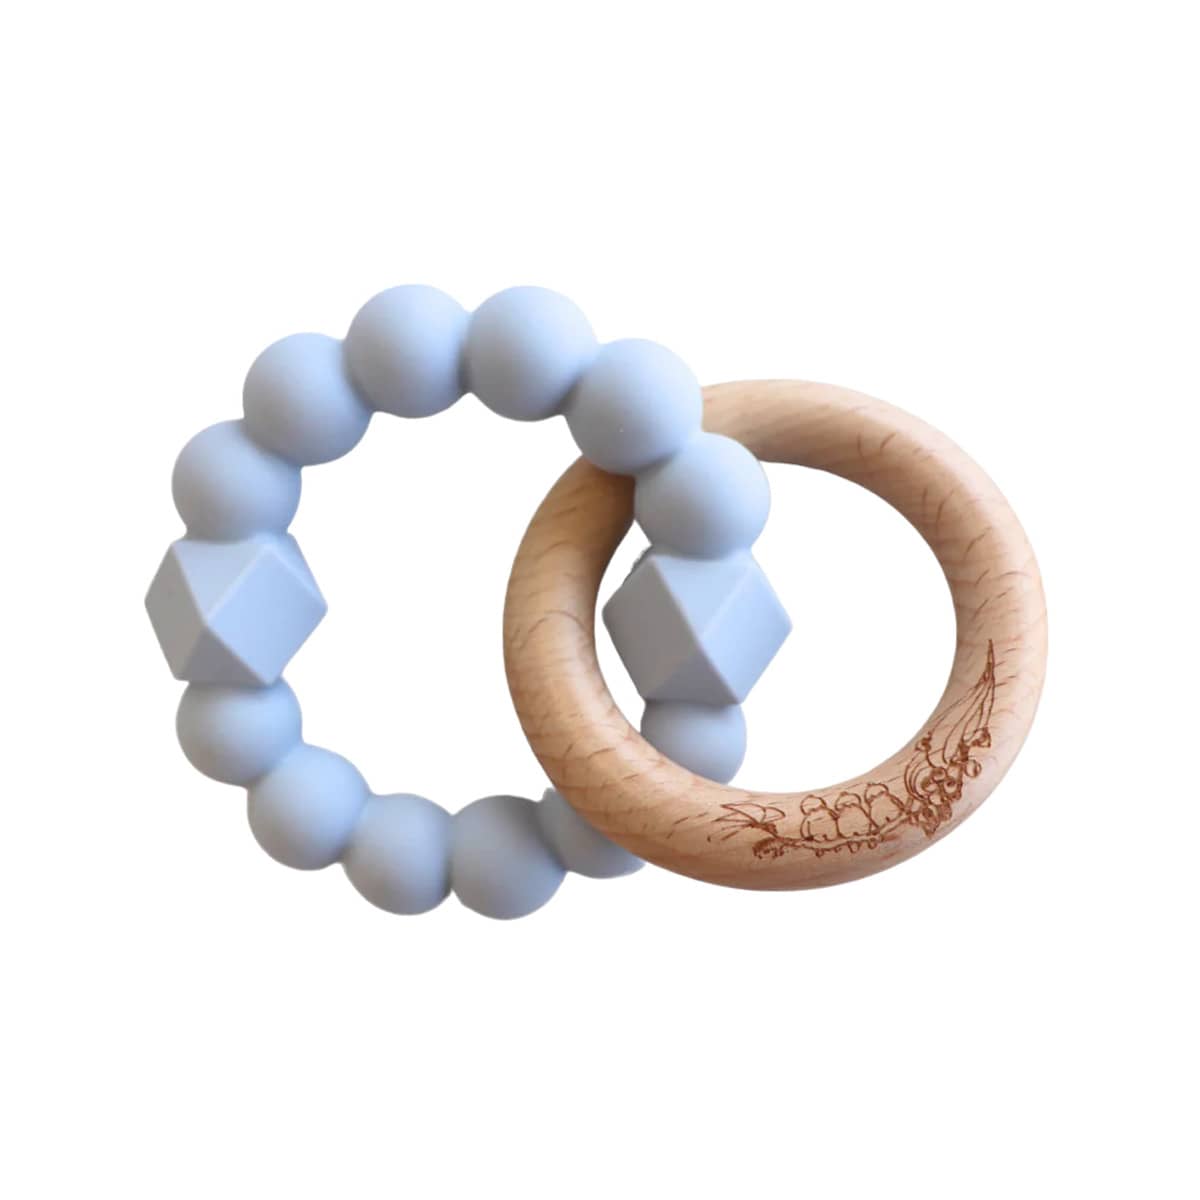 Jellystone Designs Moon Teether - May Gibbs - Soft Blue